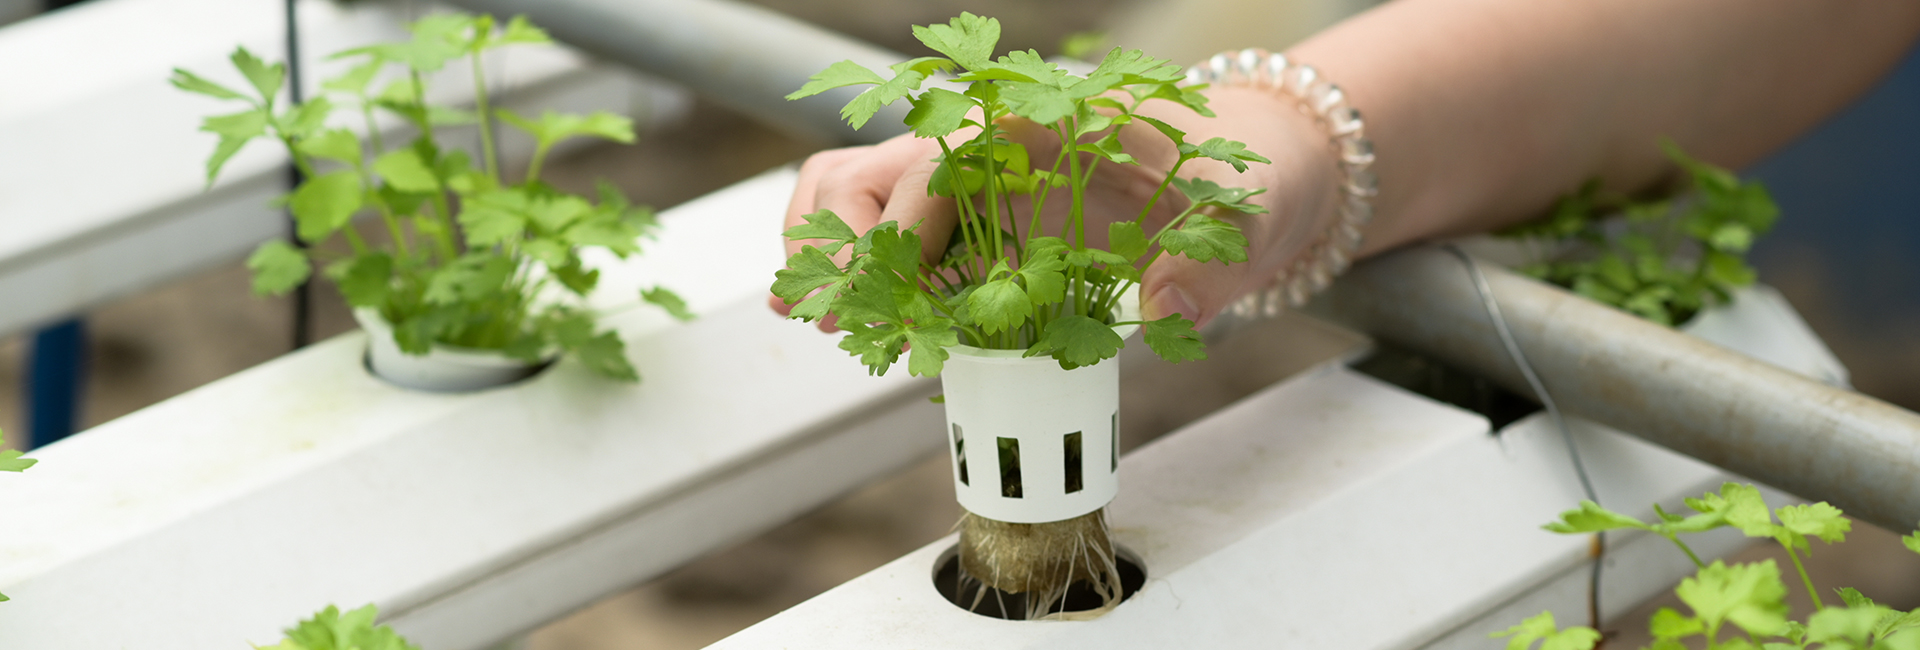 Cilantro growing hydroponically - hydroponic growing guide